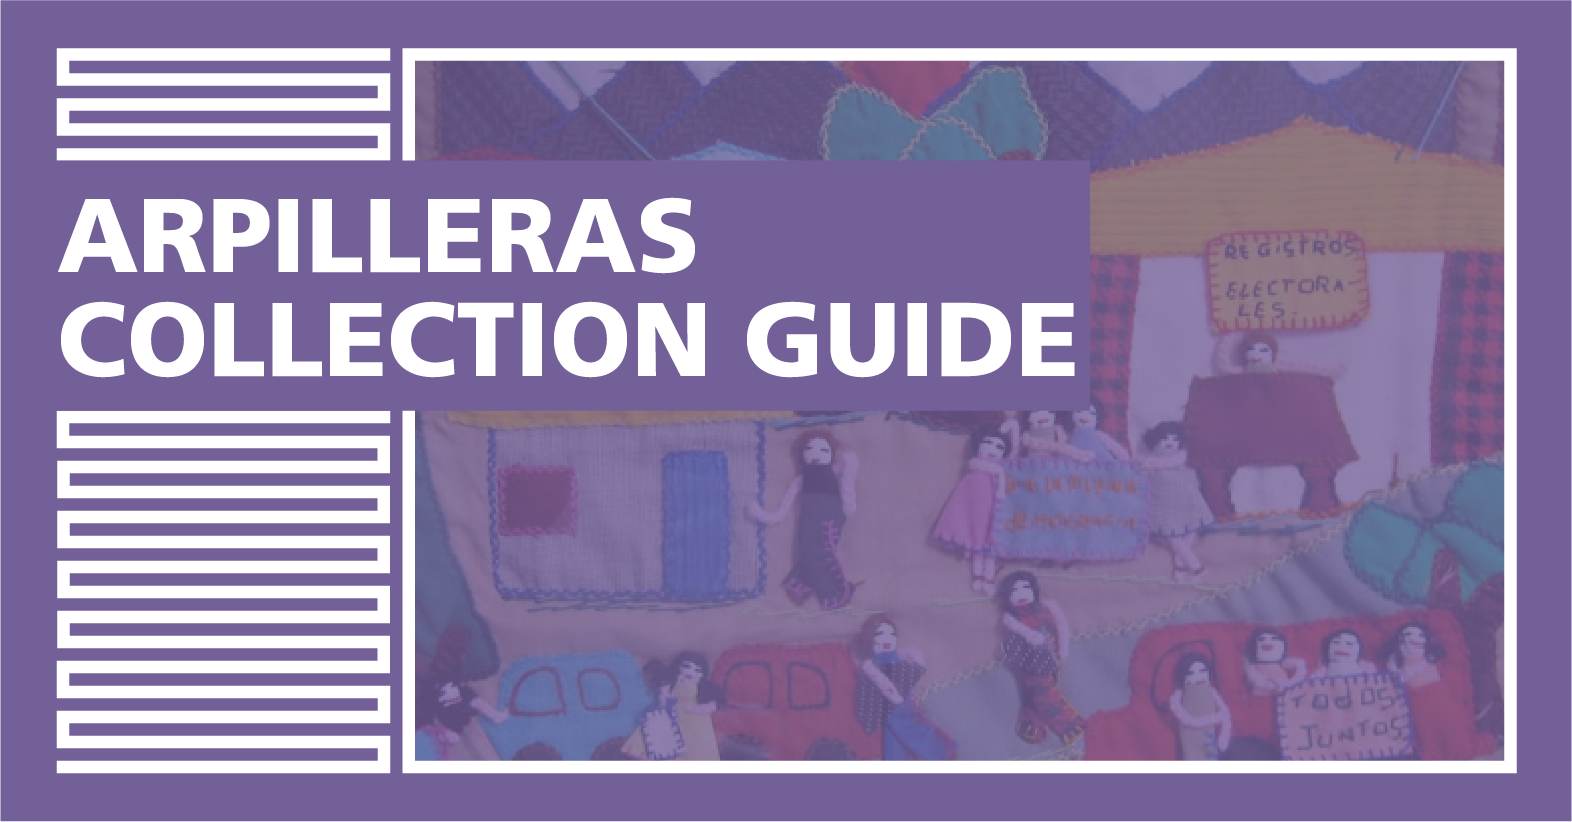 Cover Image for "Arpilleras Collection Guide"